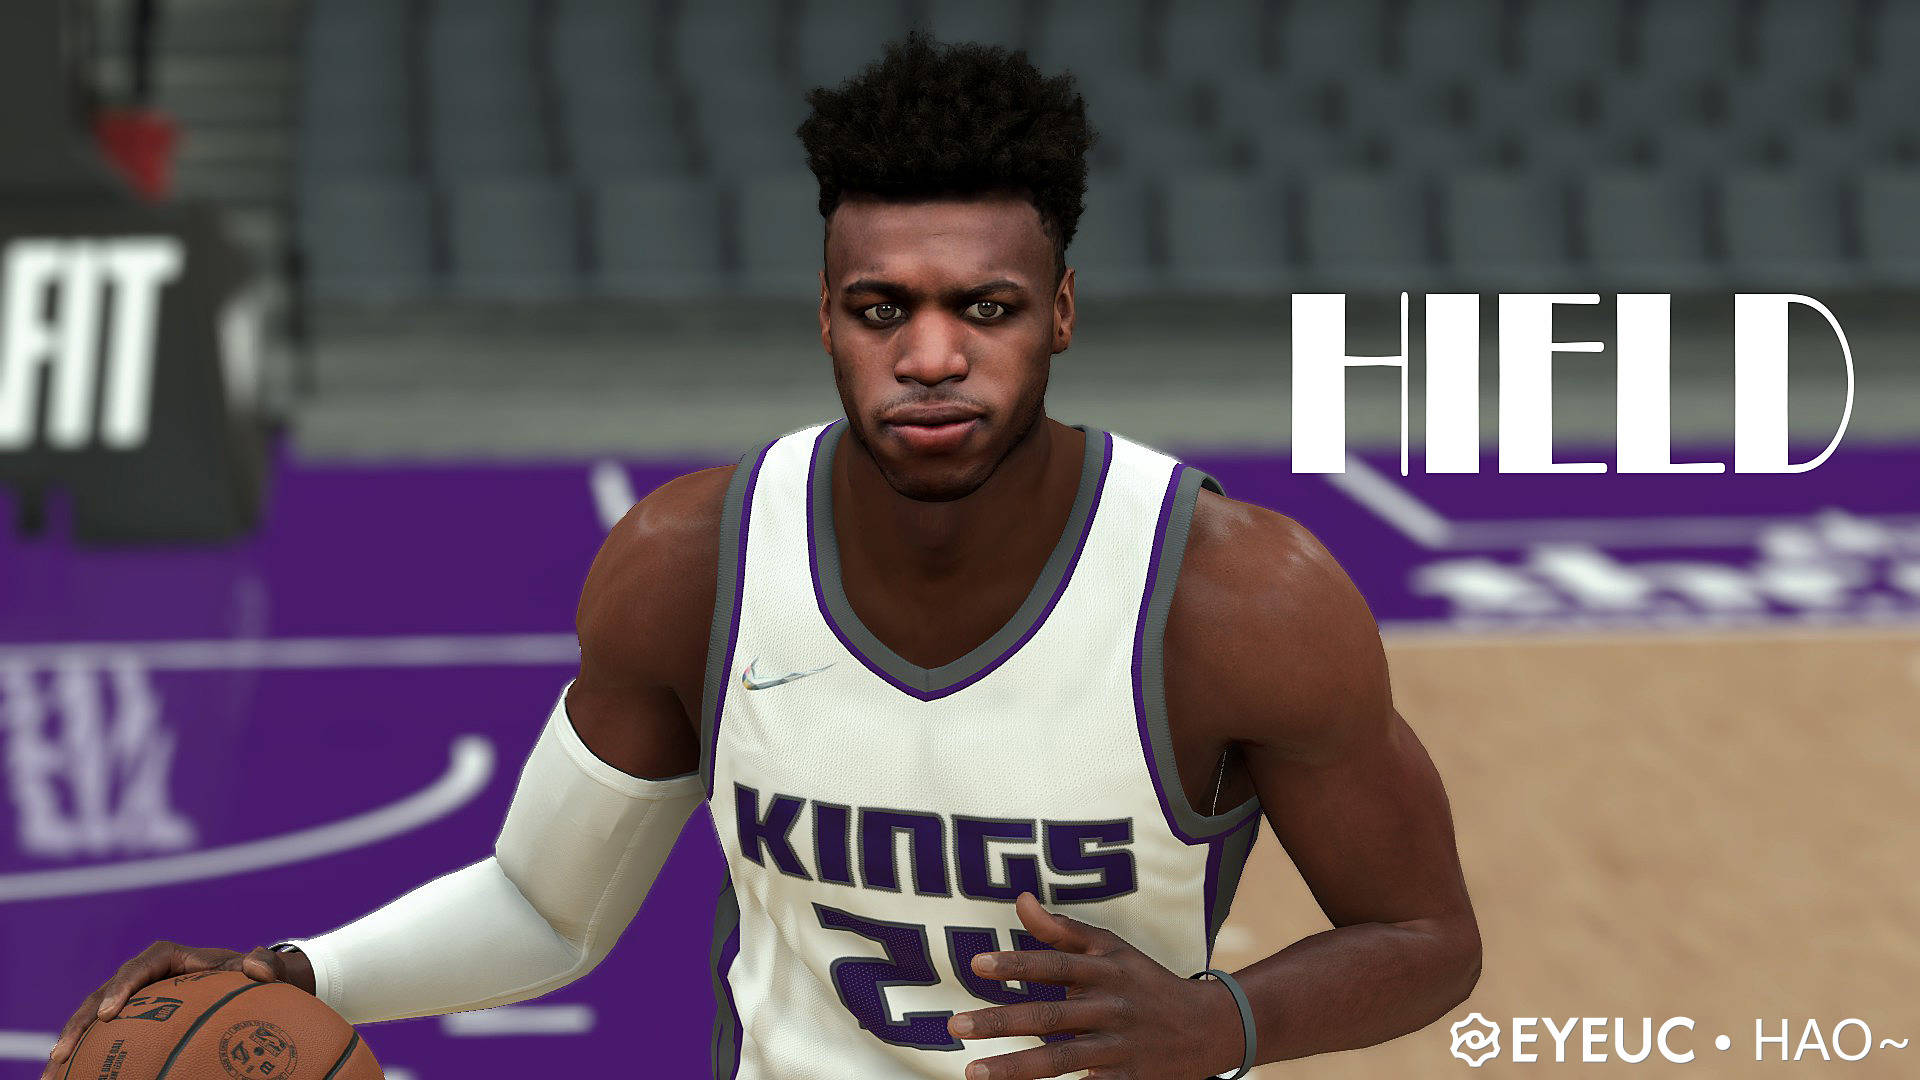 Nba Star Buddy Hield In Action Background